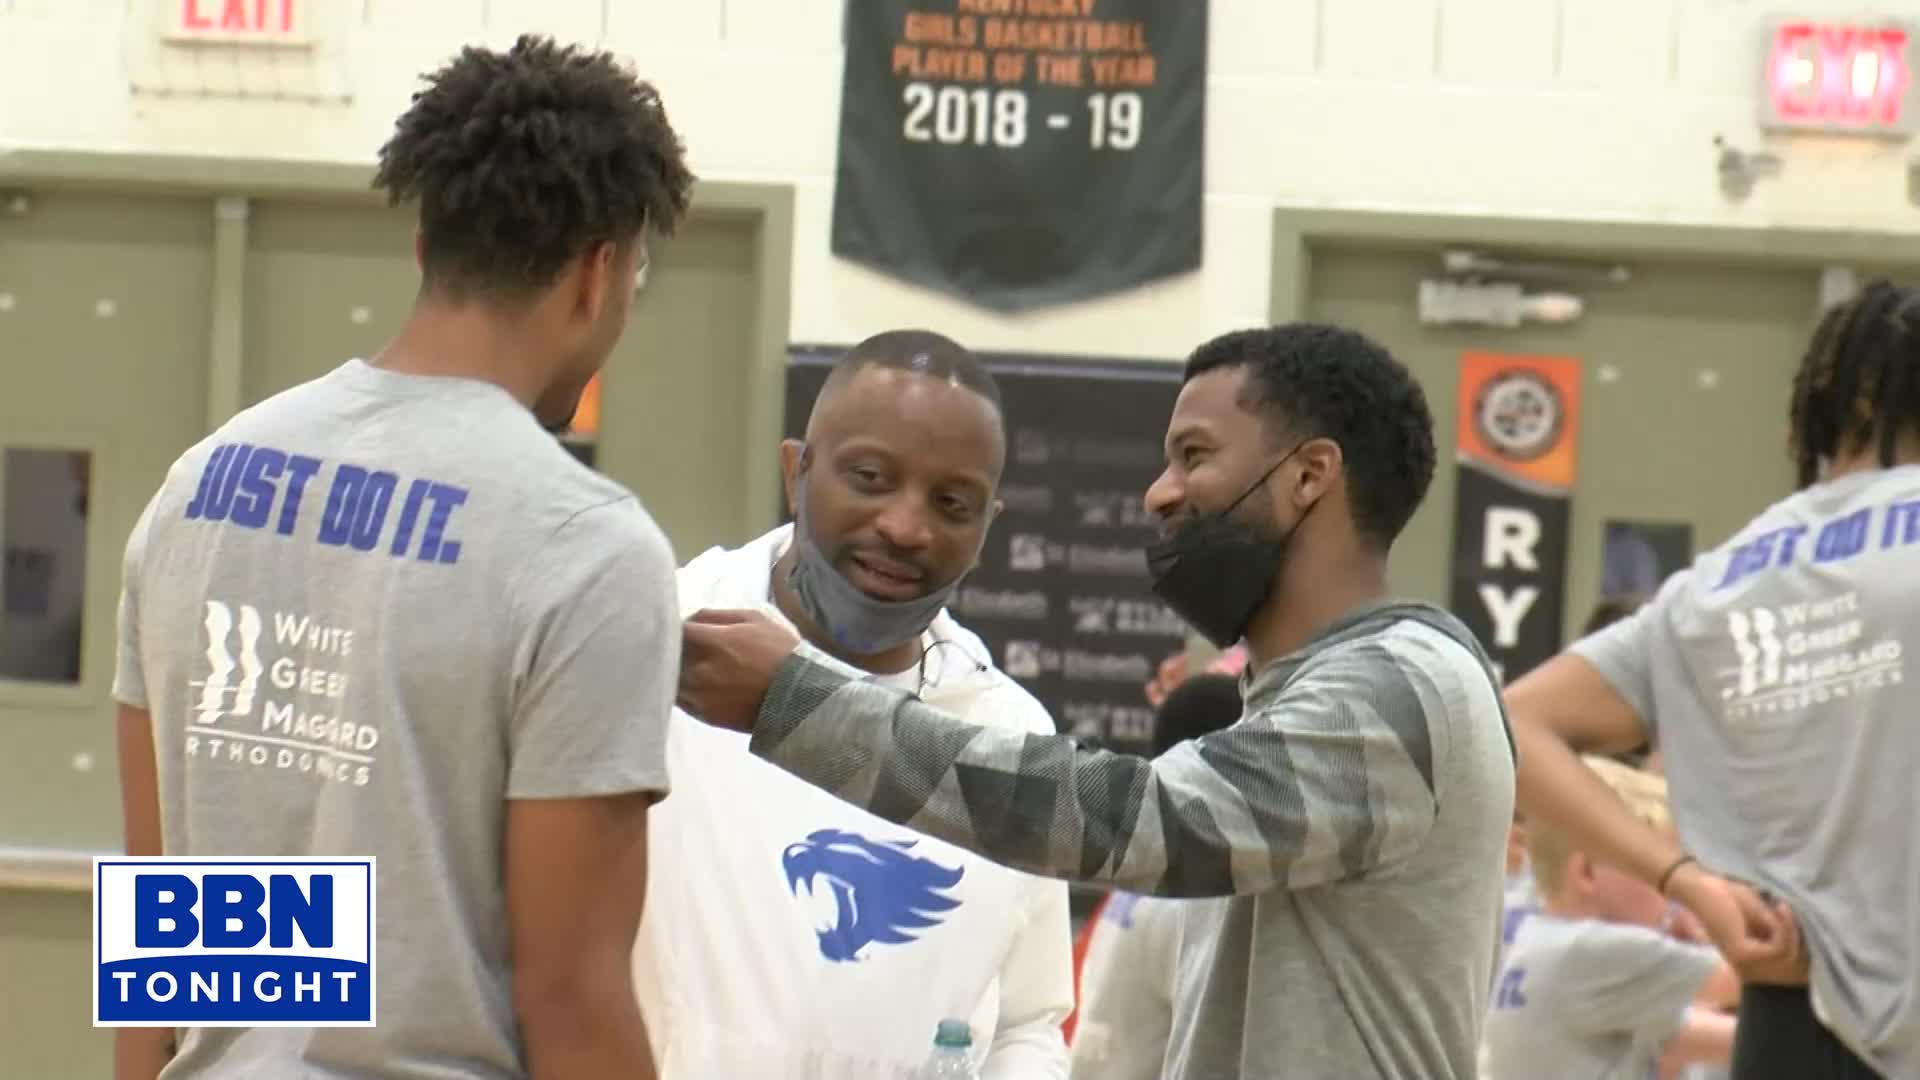 MBB: BBN Tonight - Dontaie Allen Mic'd Up at Camp